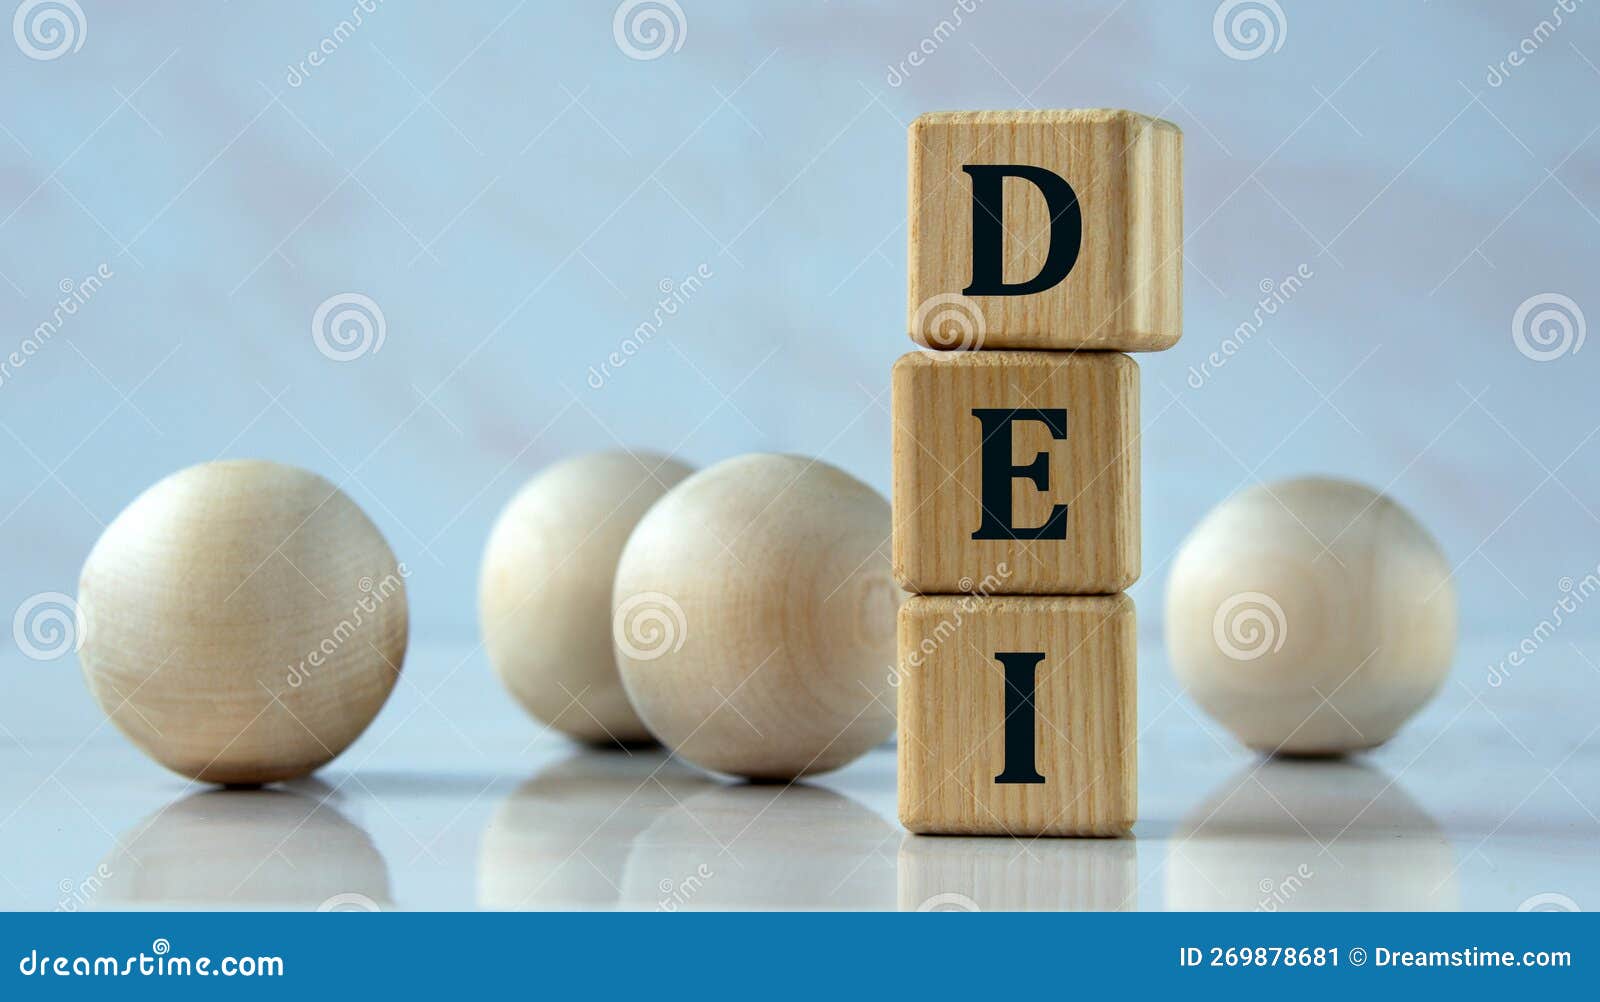 DEI - Acronym on Wooden Cubes on the Background of Light Balls